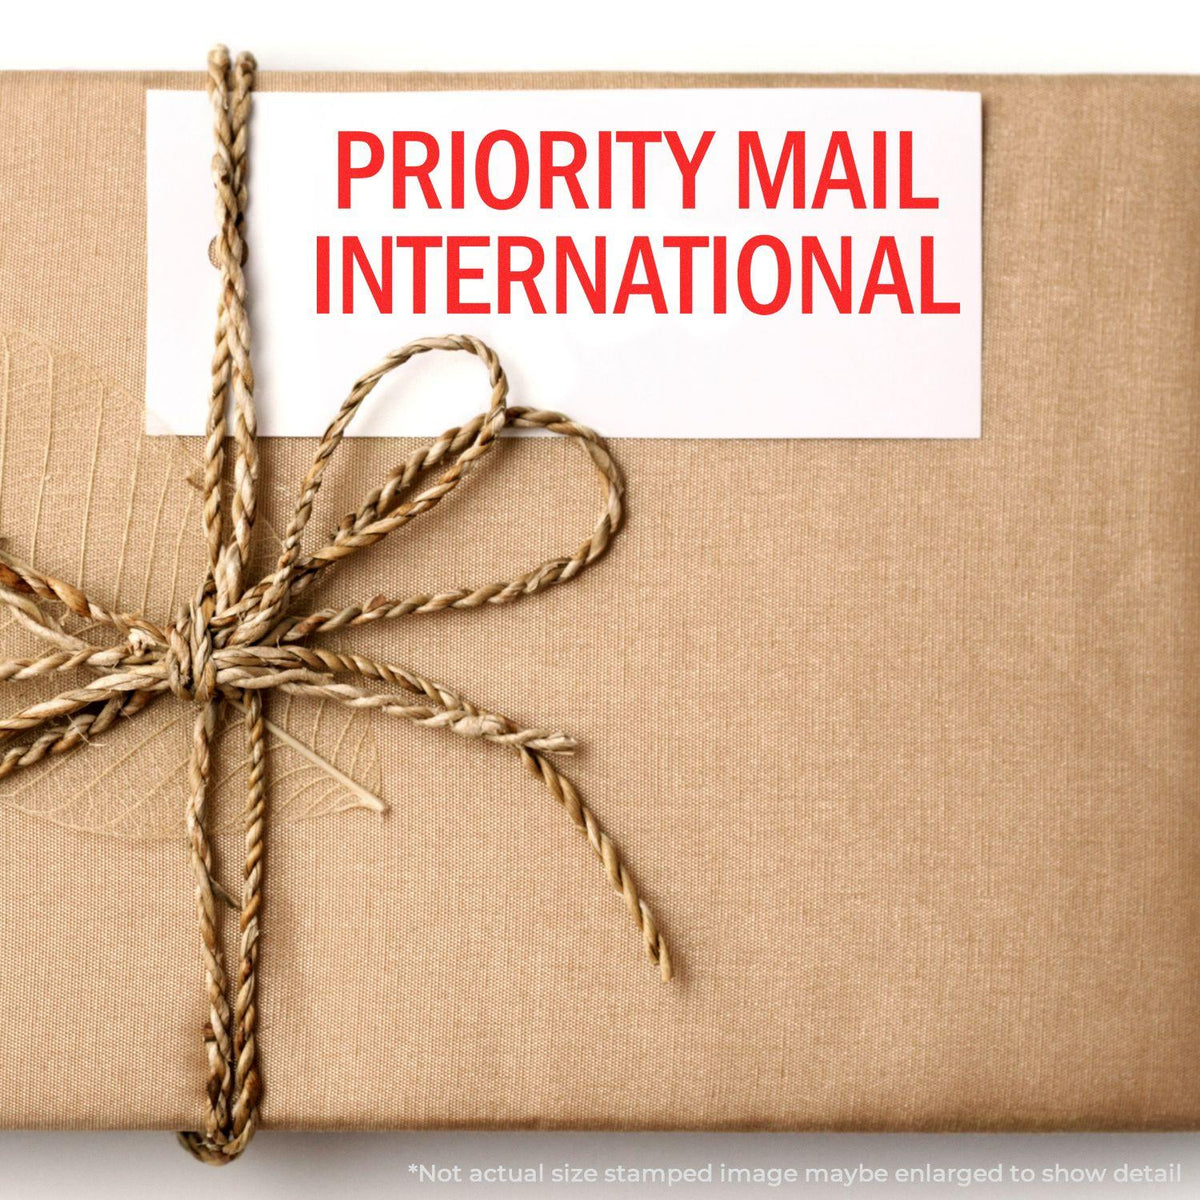 In Use Large Priority Mail International Rubber Stamp Image